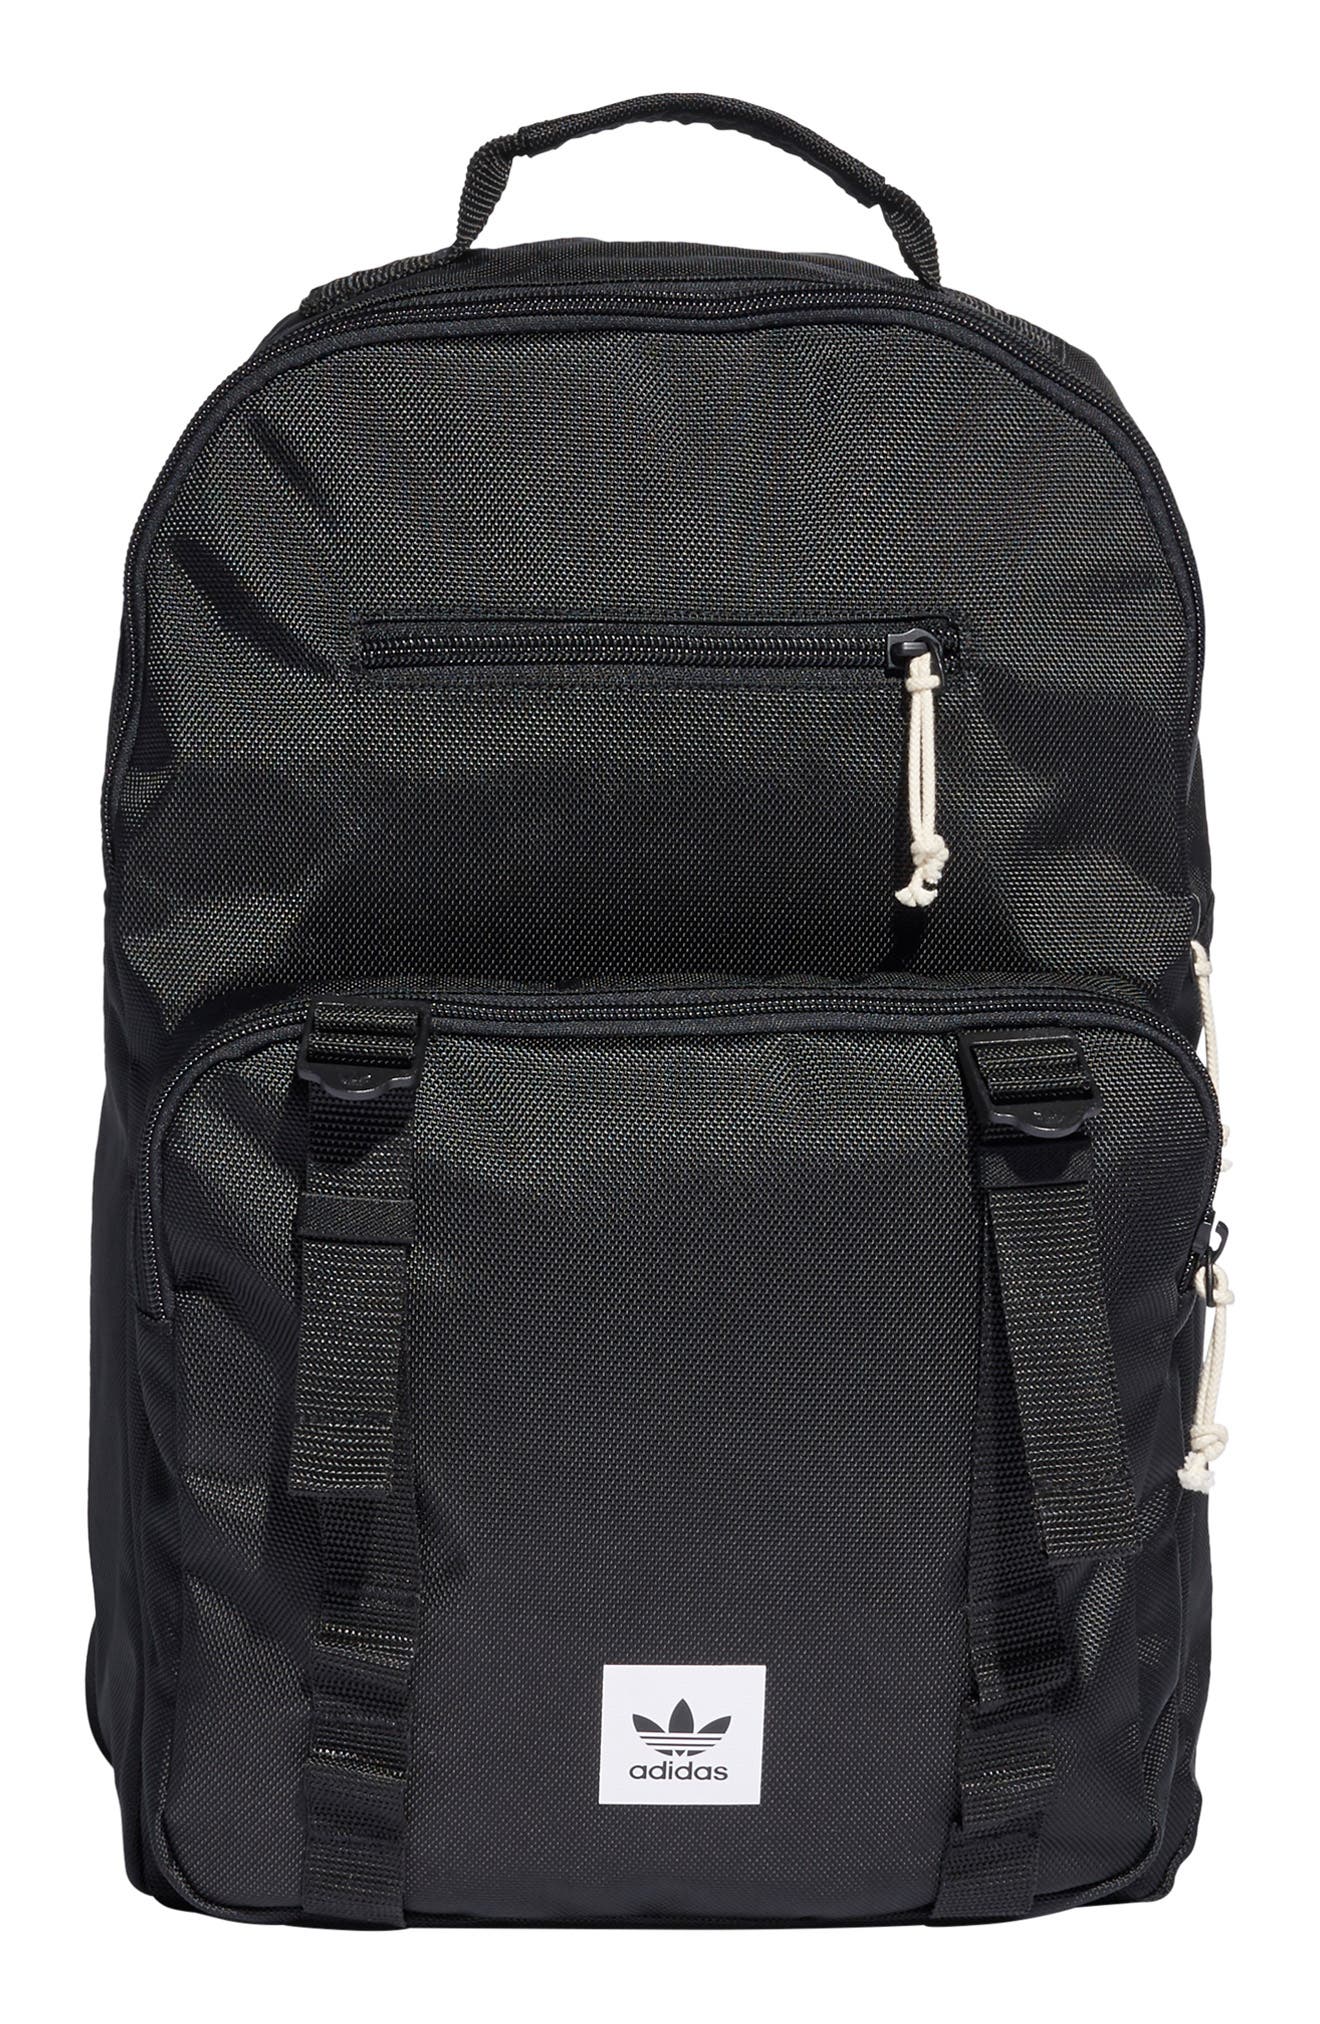 adidas atric backpack review